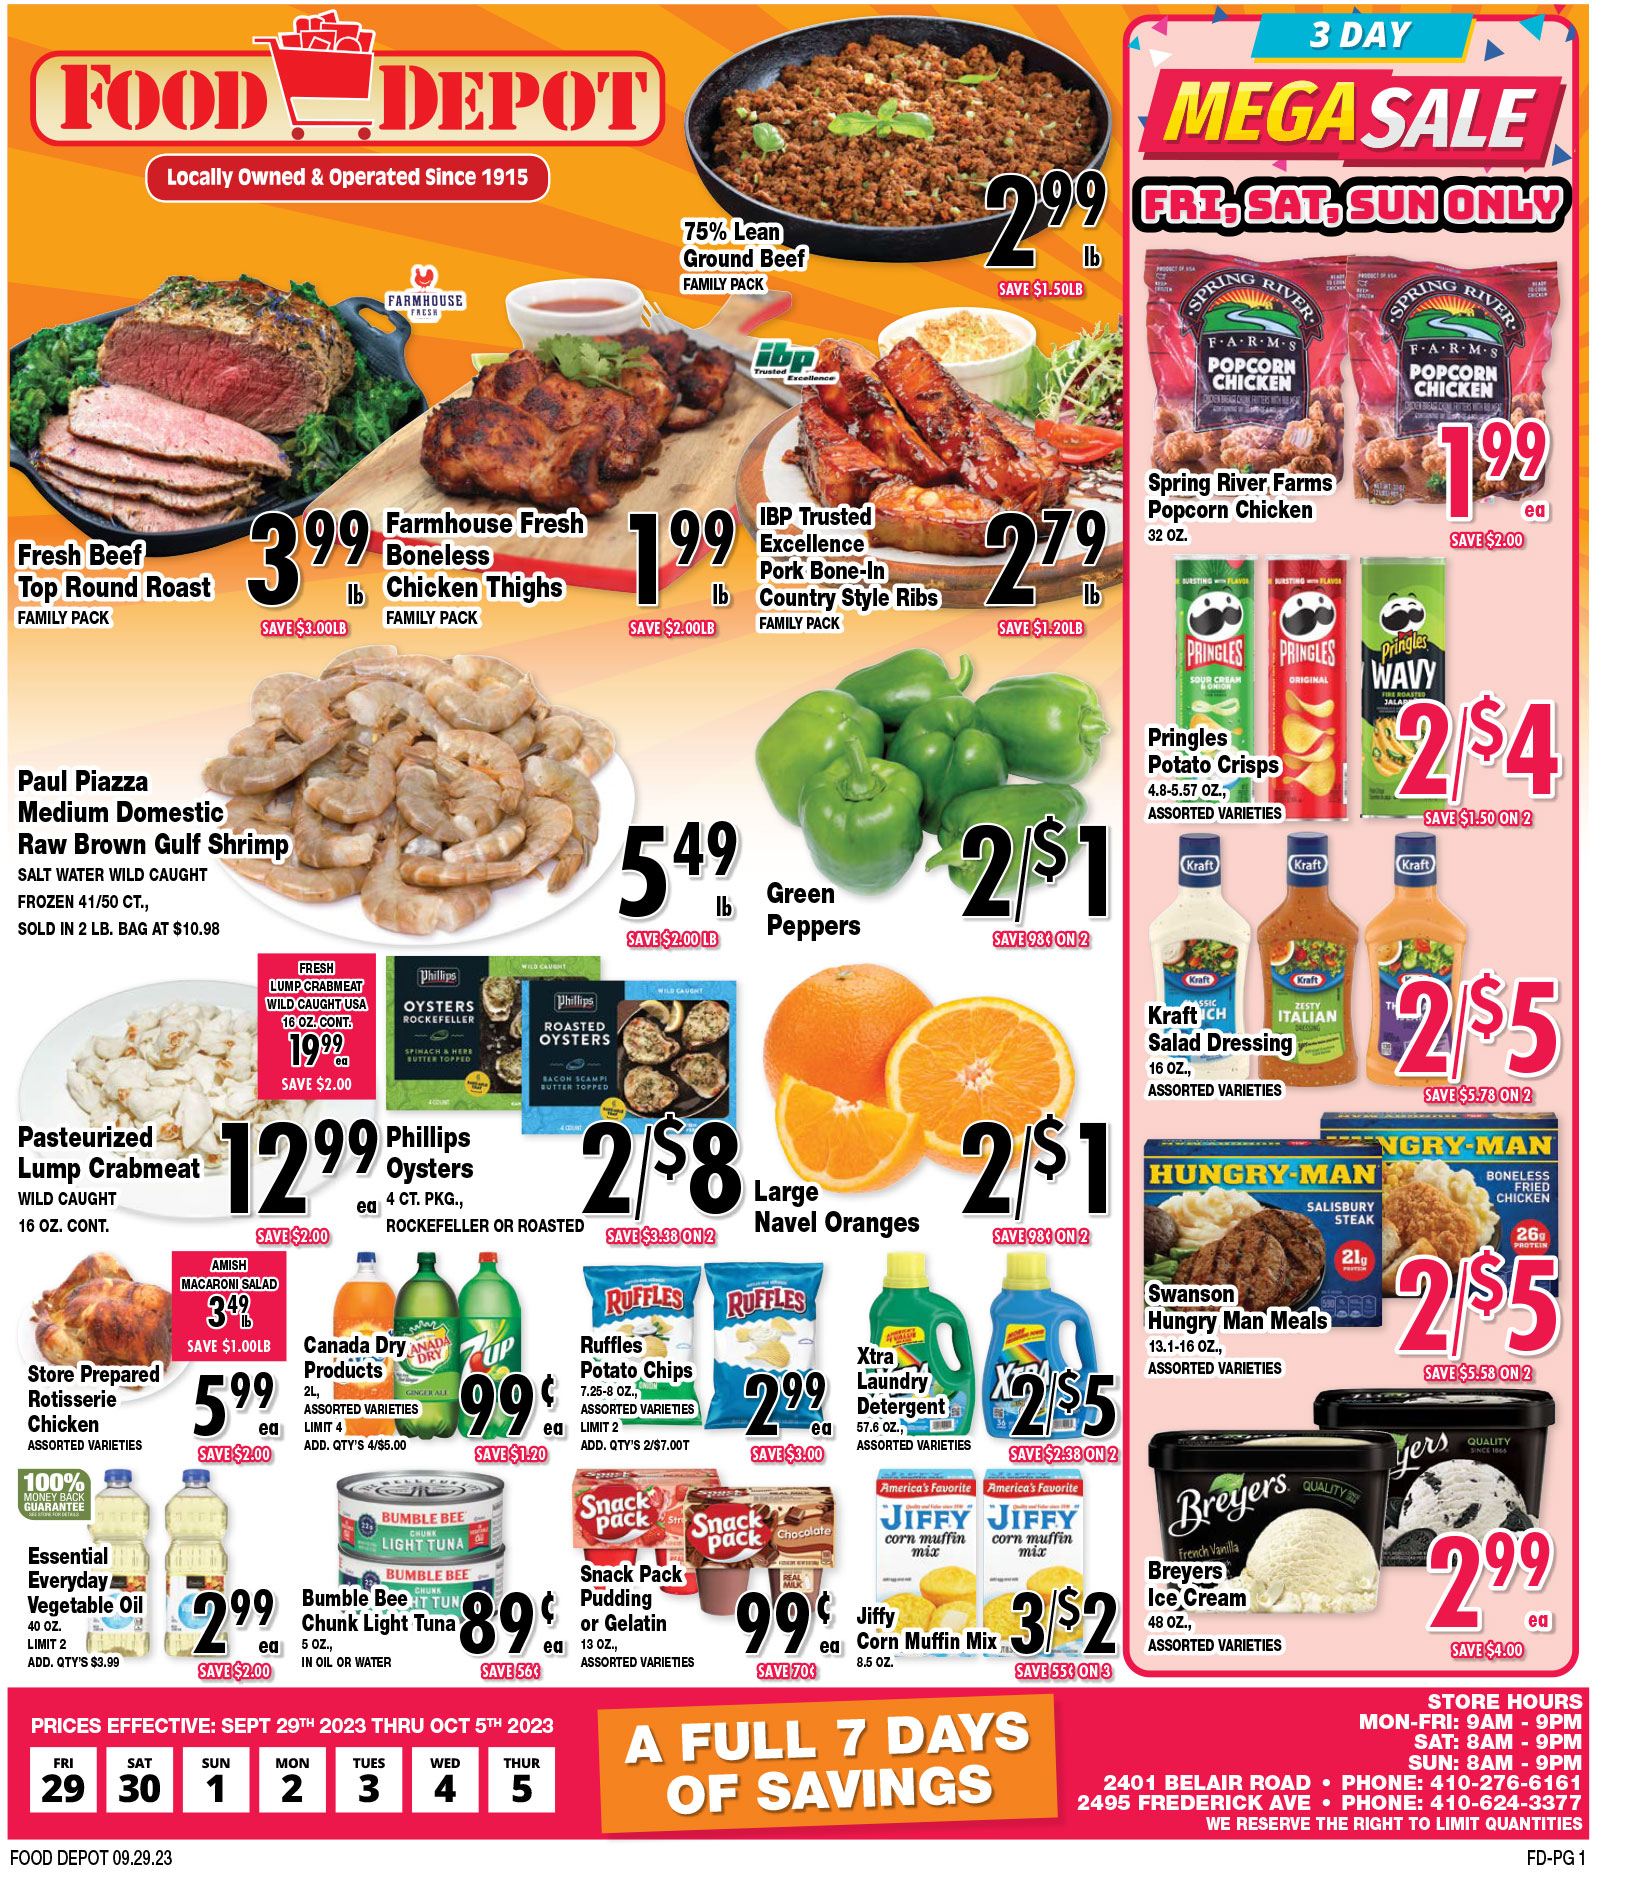 This Week's Specials - page 1